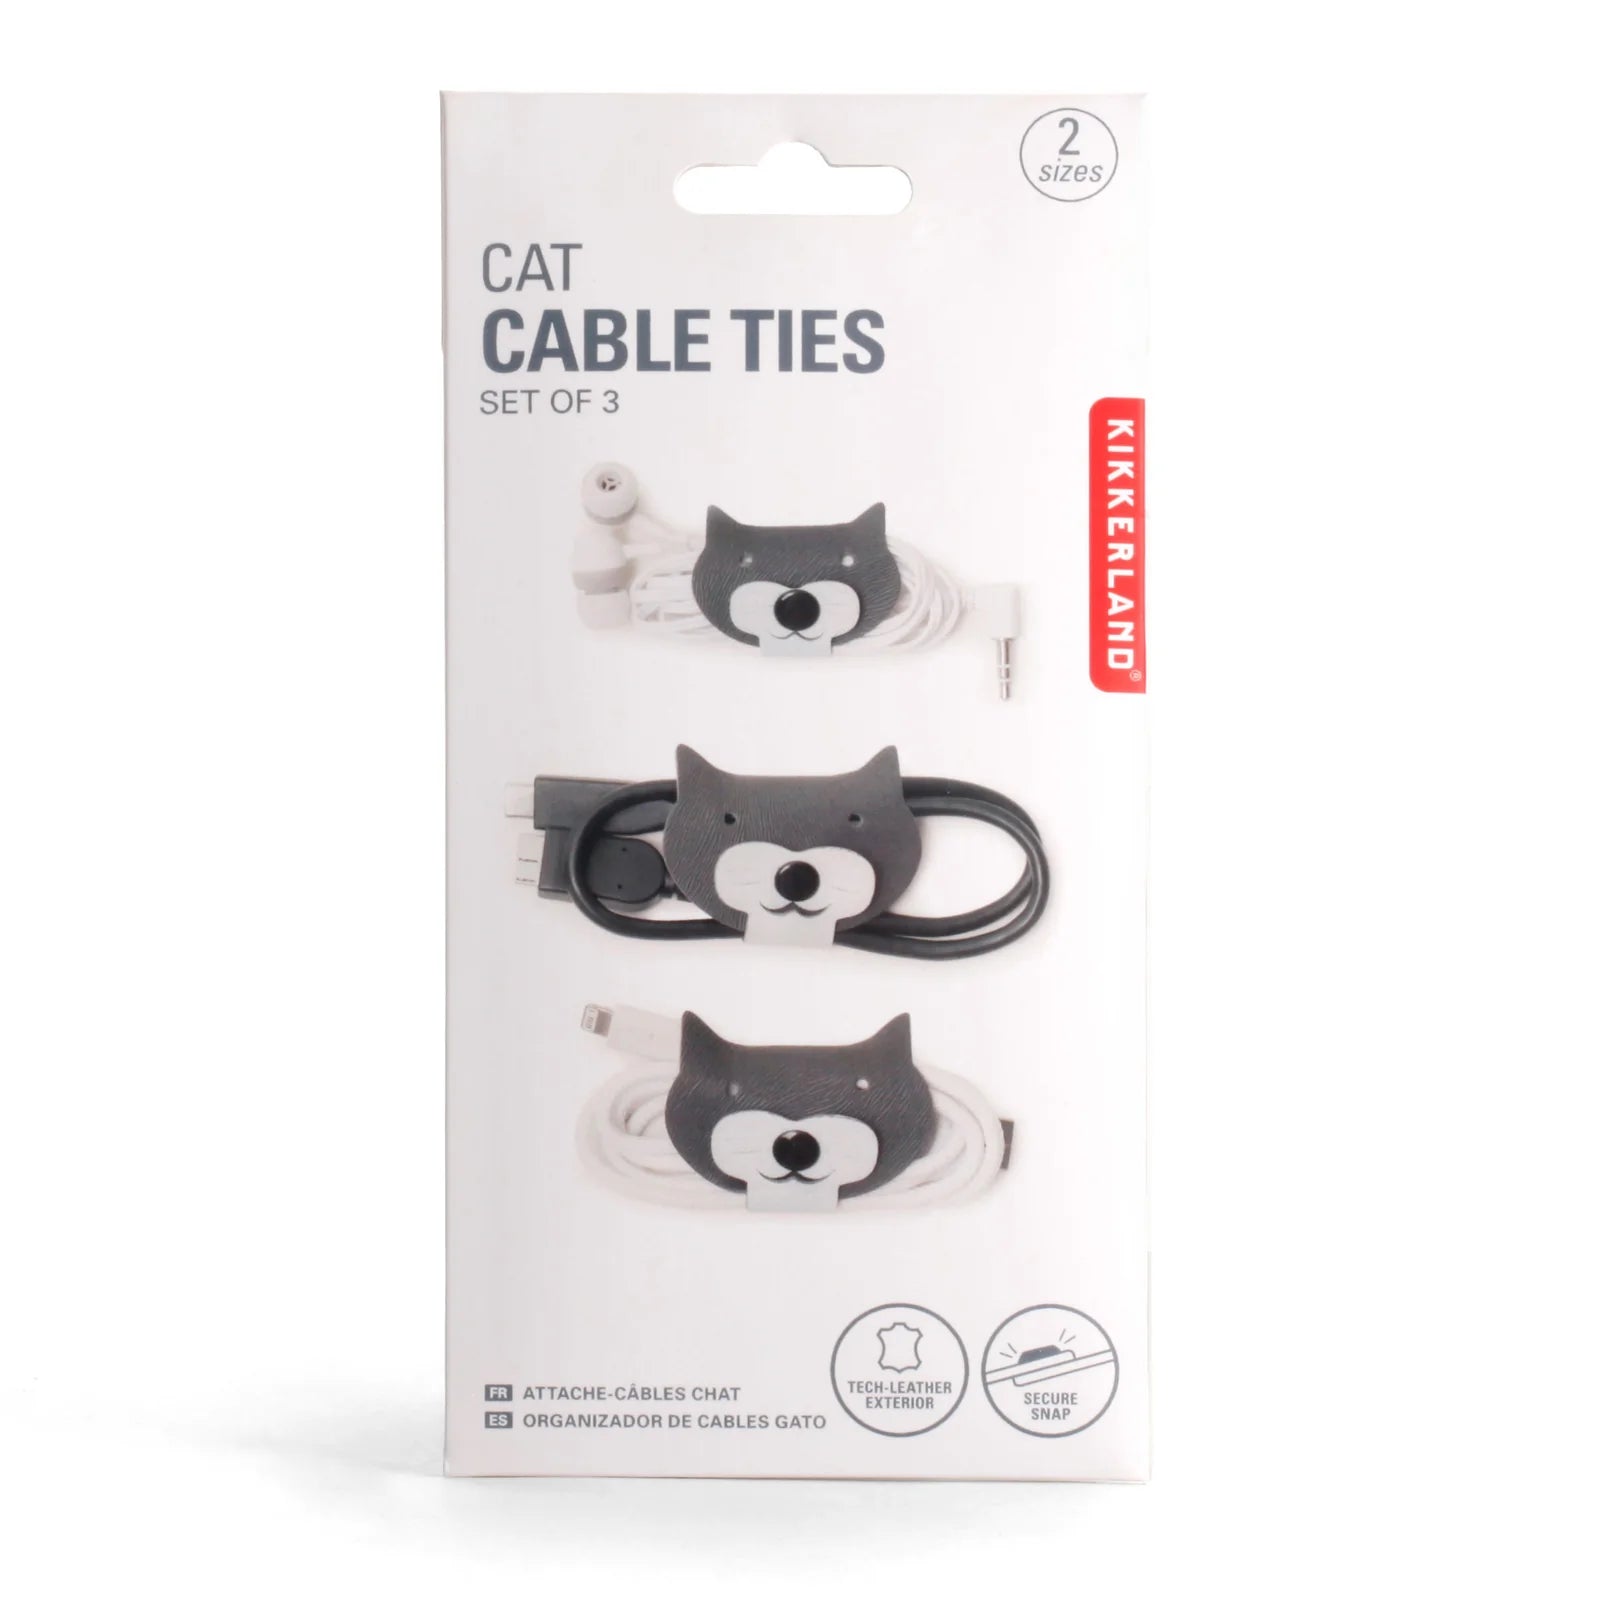 Cat Cable Ties (set of 3)